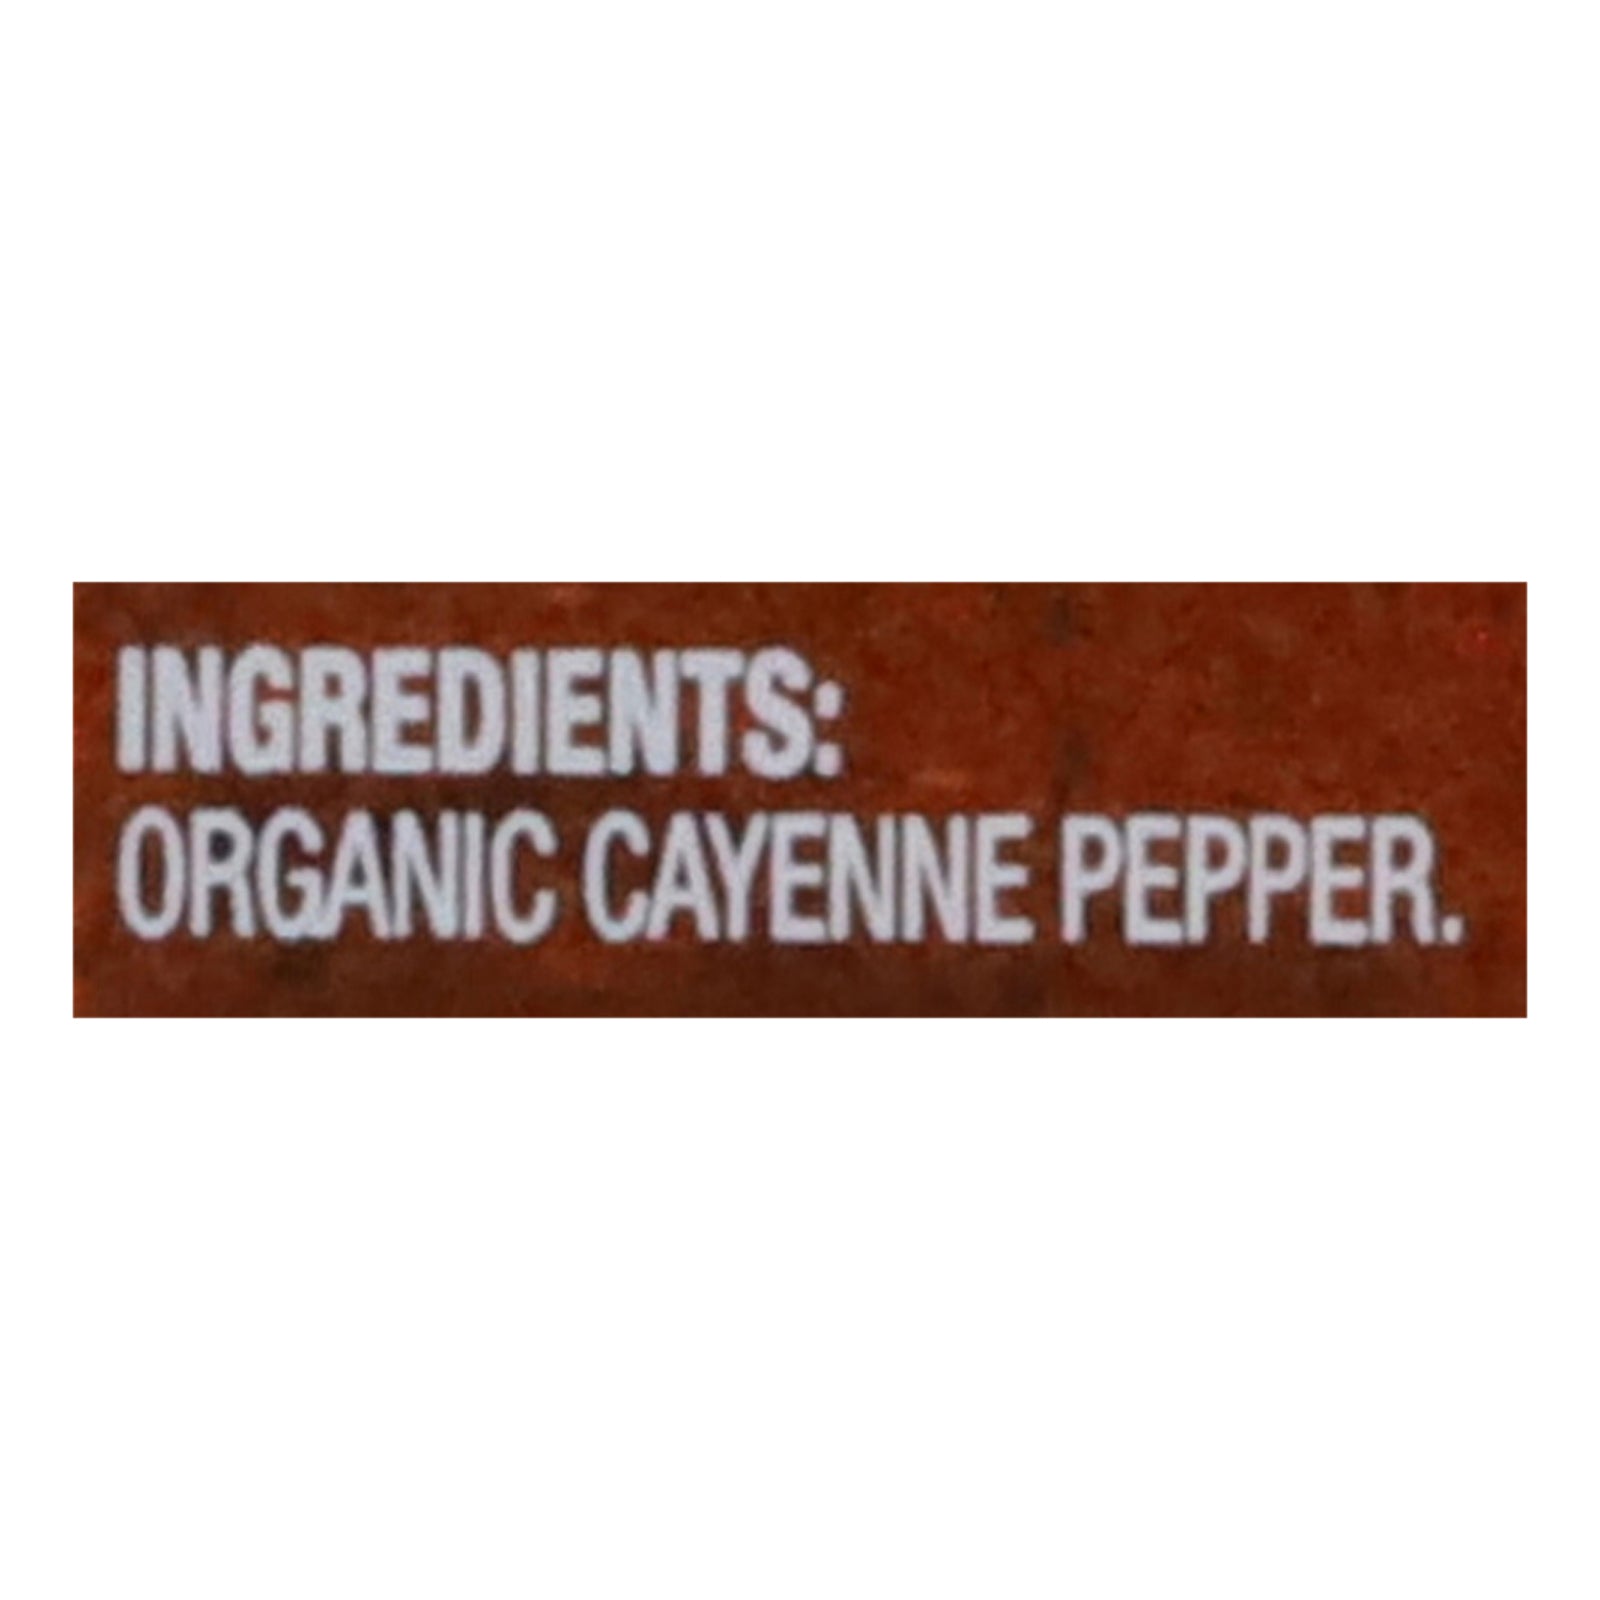 Simply Organic - Cayenne Pepper Organic - Case of 6 - 2.89 ounces